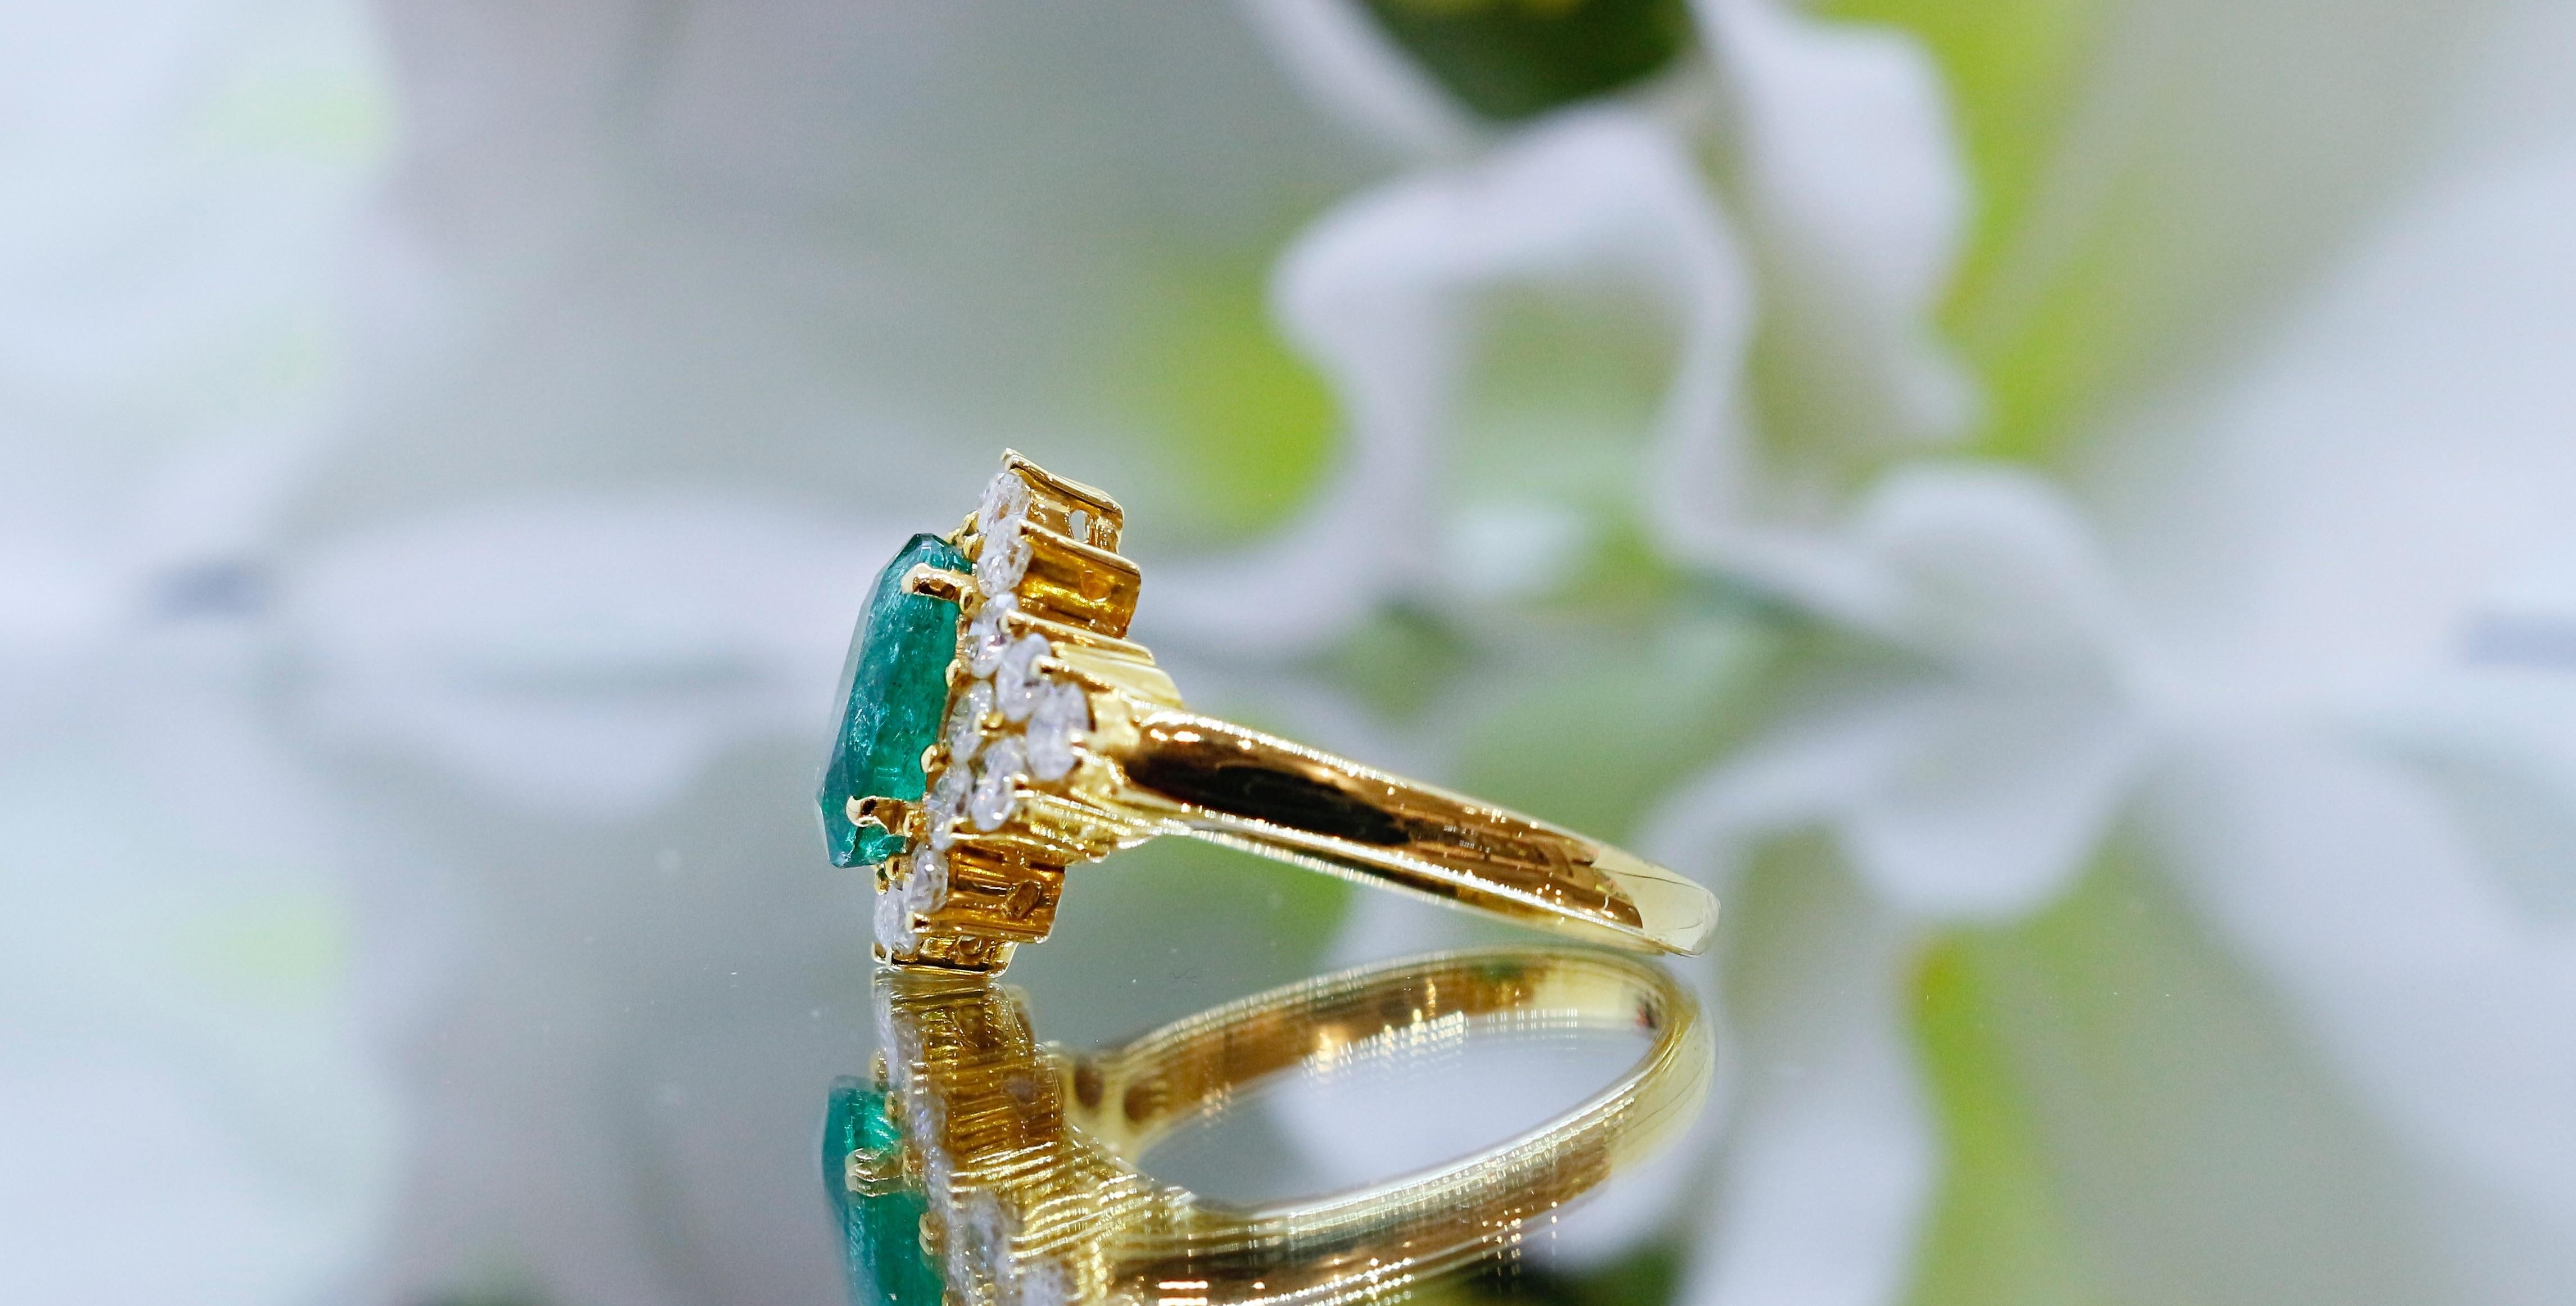 ◆Detail description◆

◆Solid 14k Gold(shown in picture)

◆Natural Emerald Weight: 2 CT

◆Diamond Carat: 1 CT

◆Diamond Shape: Round

◆Total Weight: 5.1 Gram